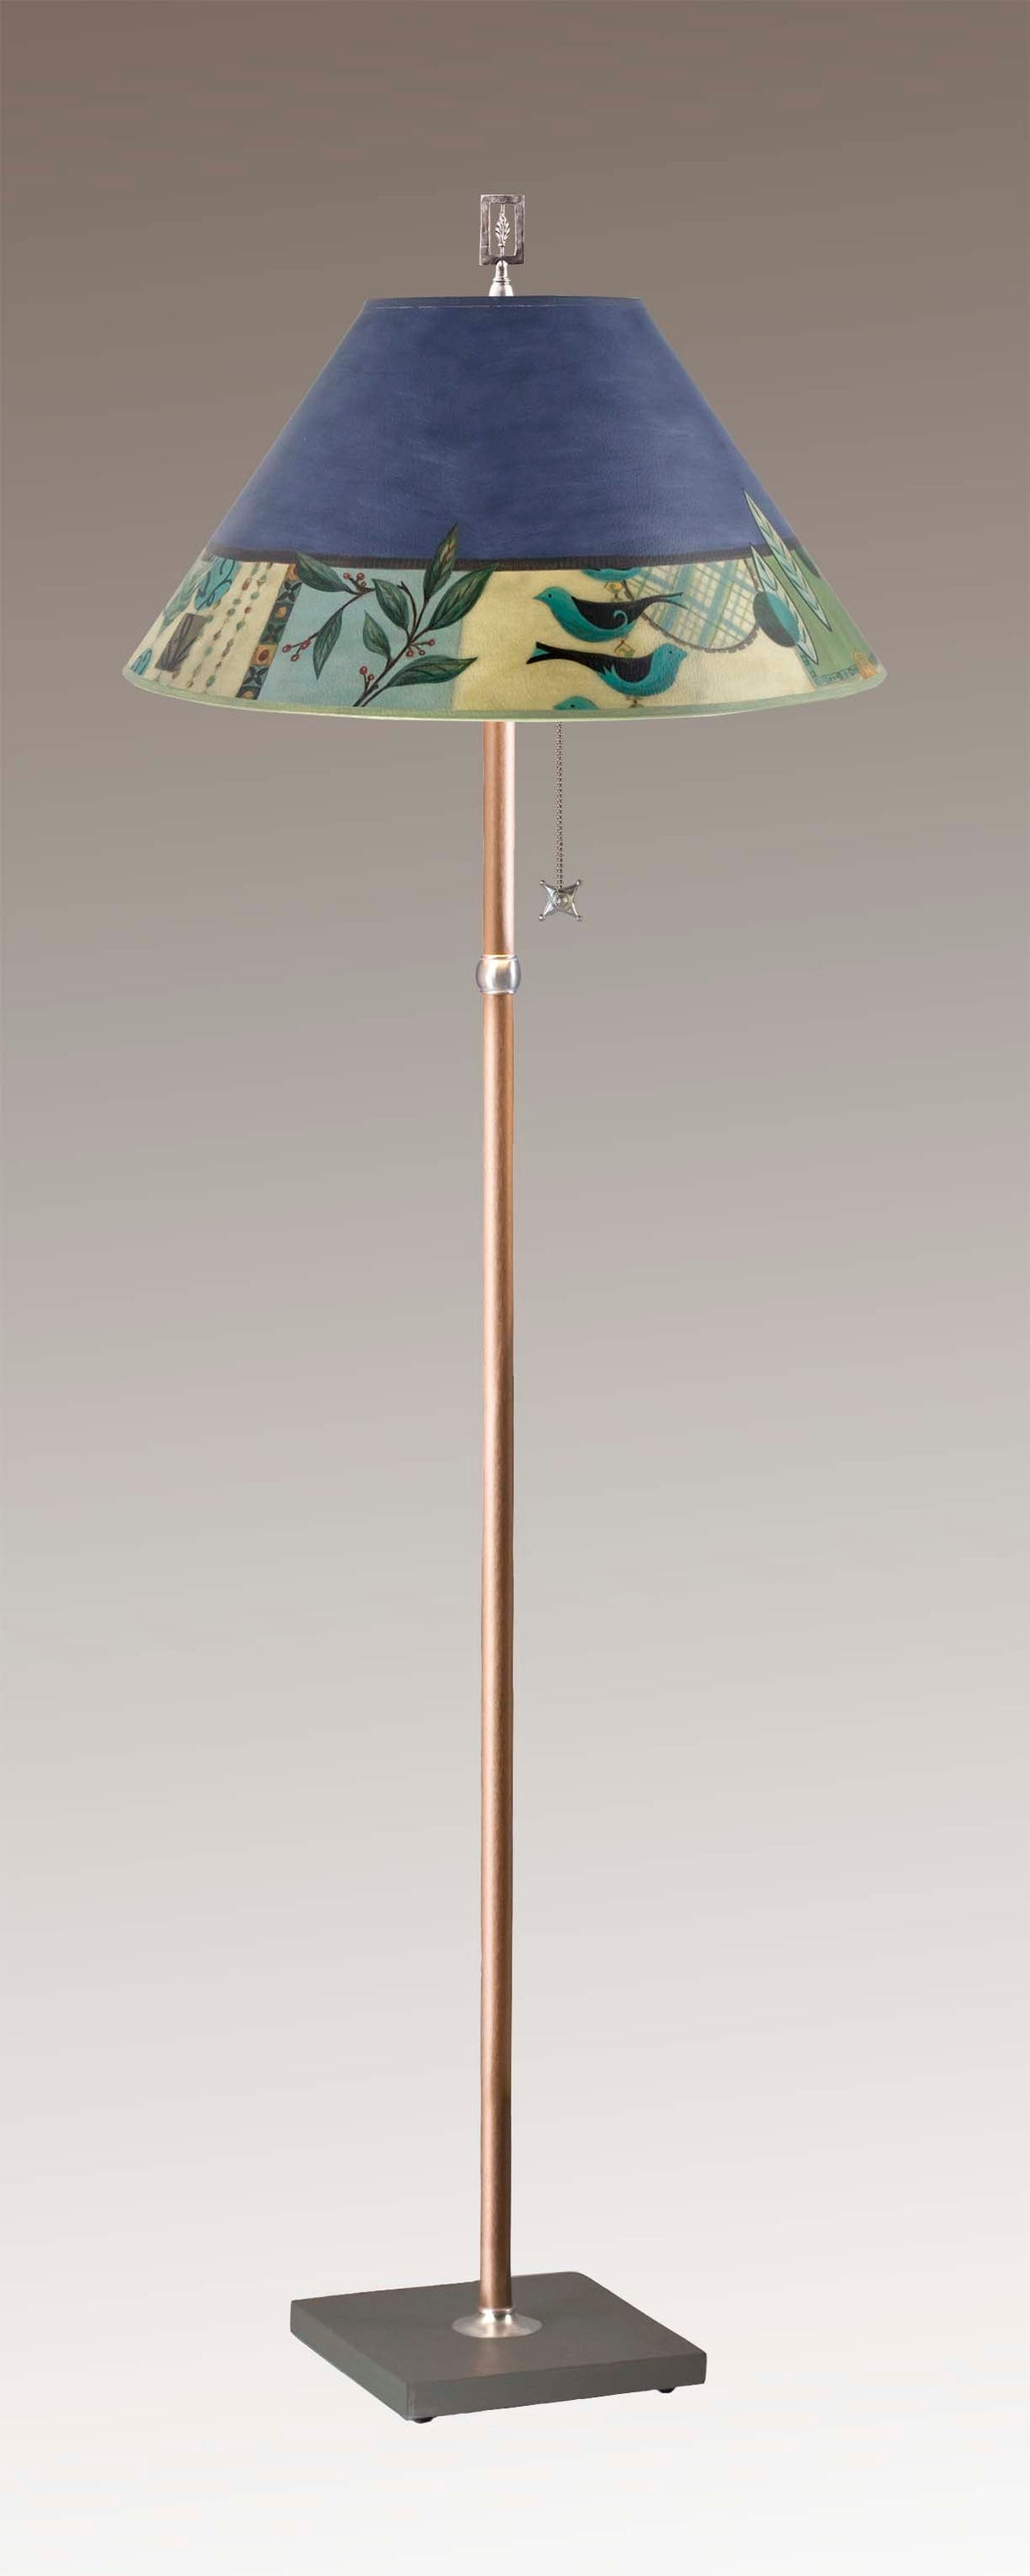 Janna Ugone &amp; Co Floor Lamps Copper Floor Lamp with Large Conical Shade in New Capri Periwinkle